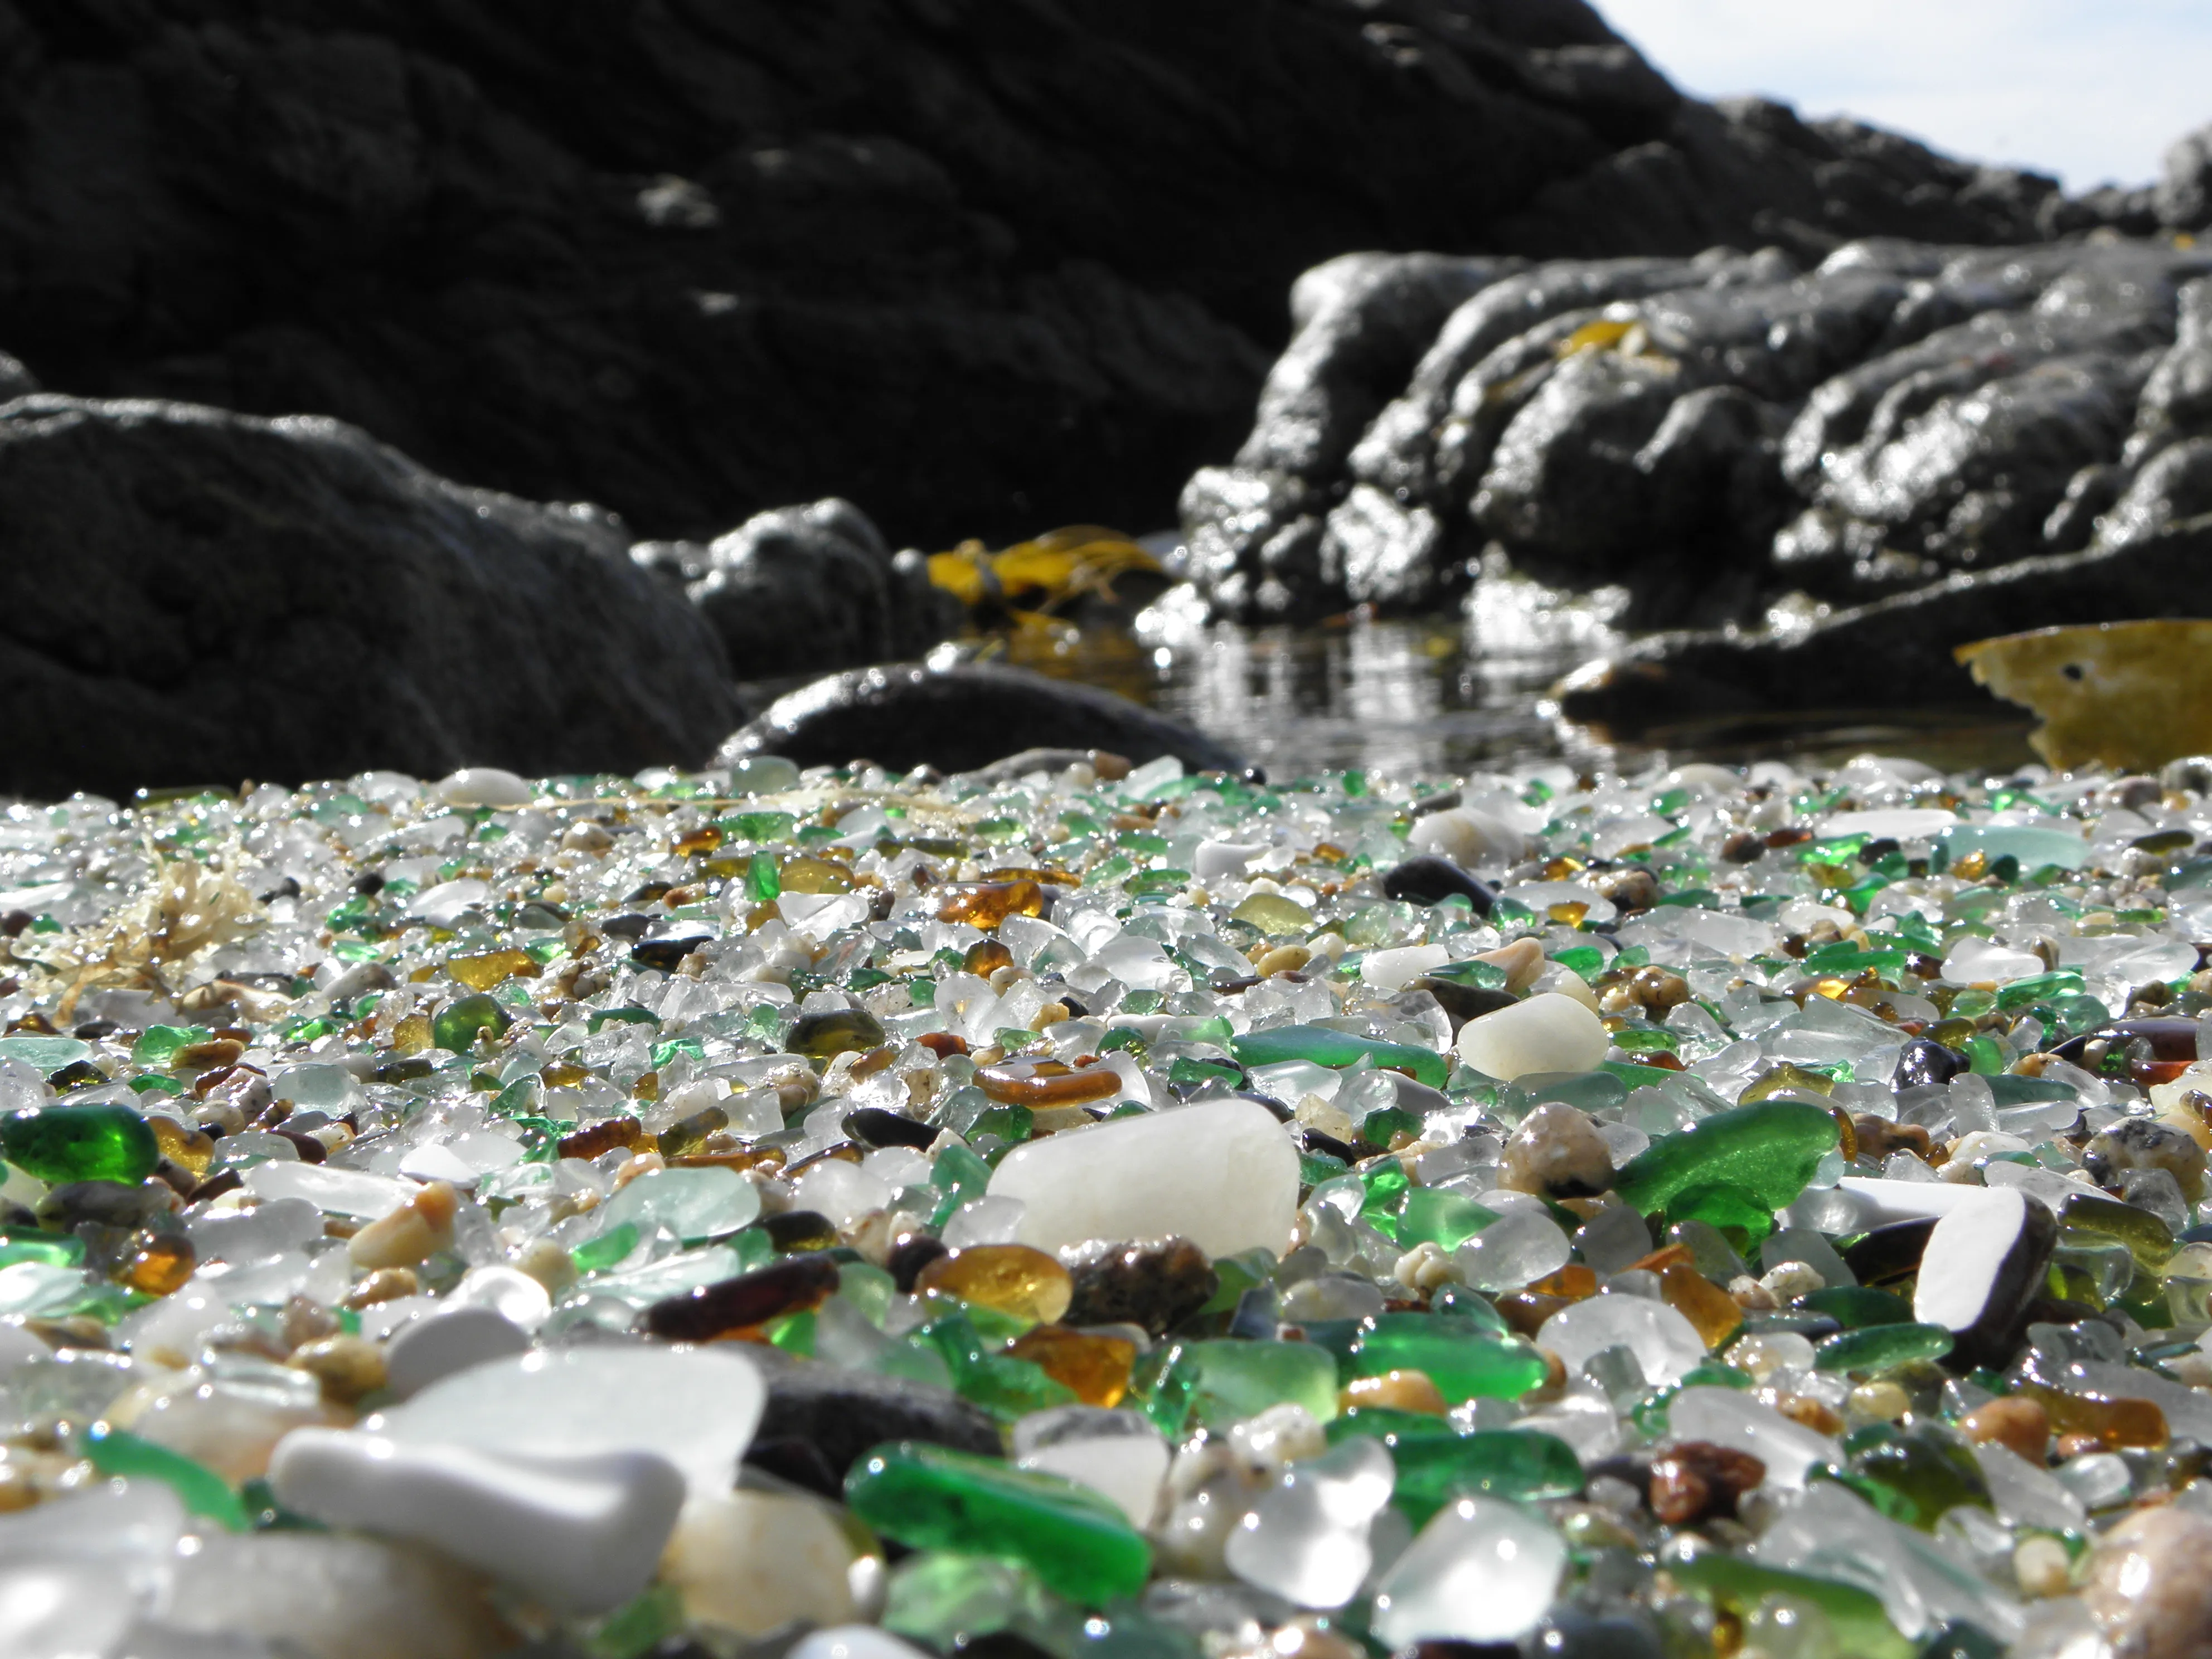 Did you ever hear about sea glass?